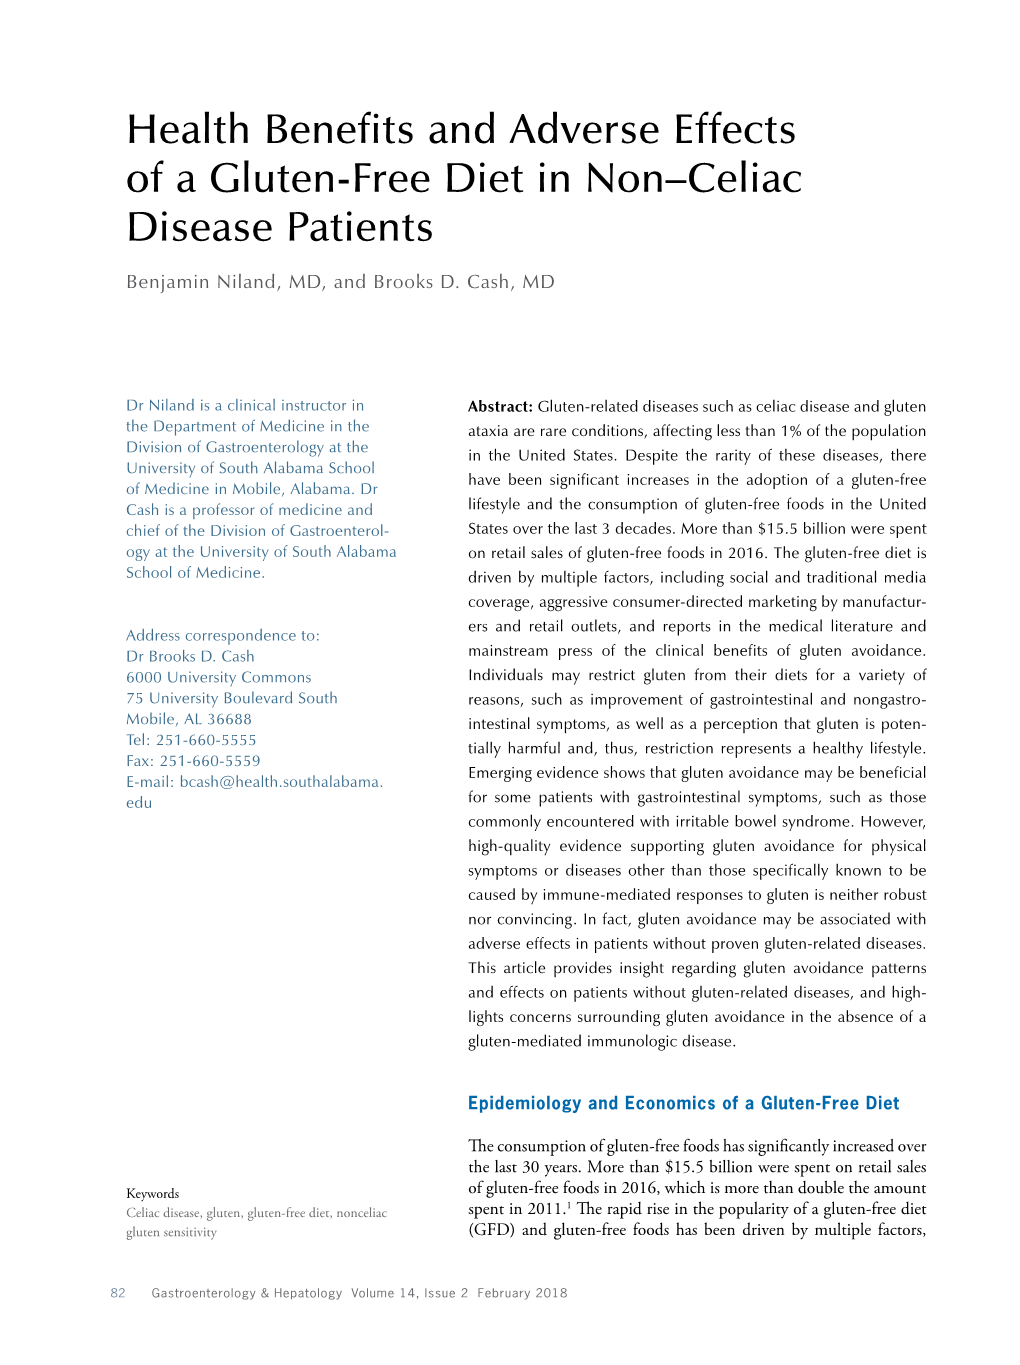 Health Benefits and Adverse Effects of a Gluten-Free Diet in Non–Celiac Disease Patients